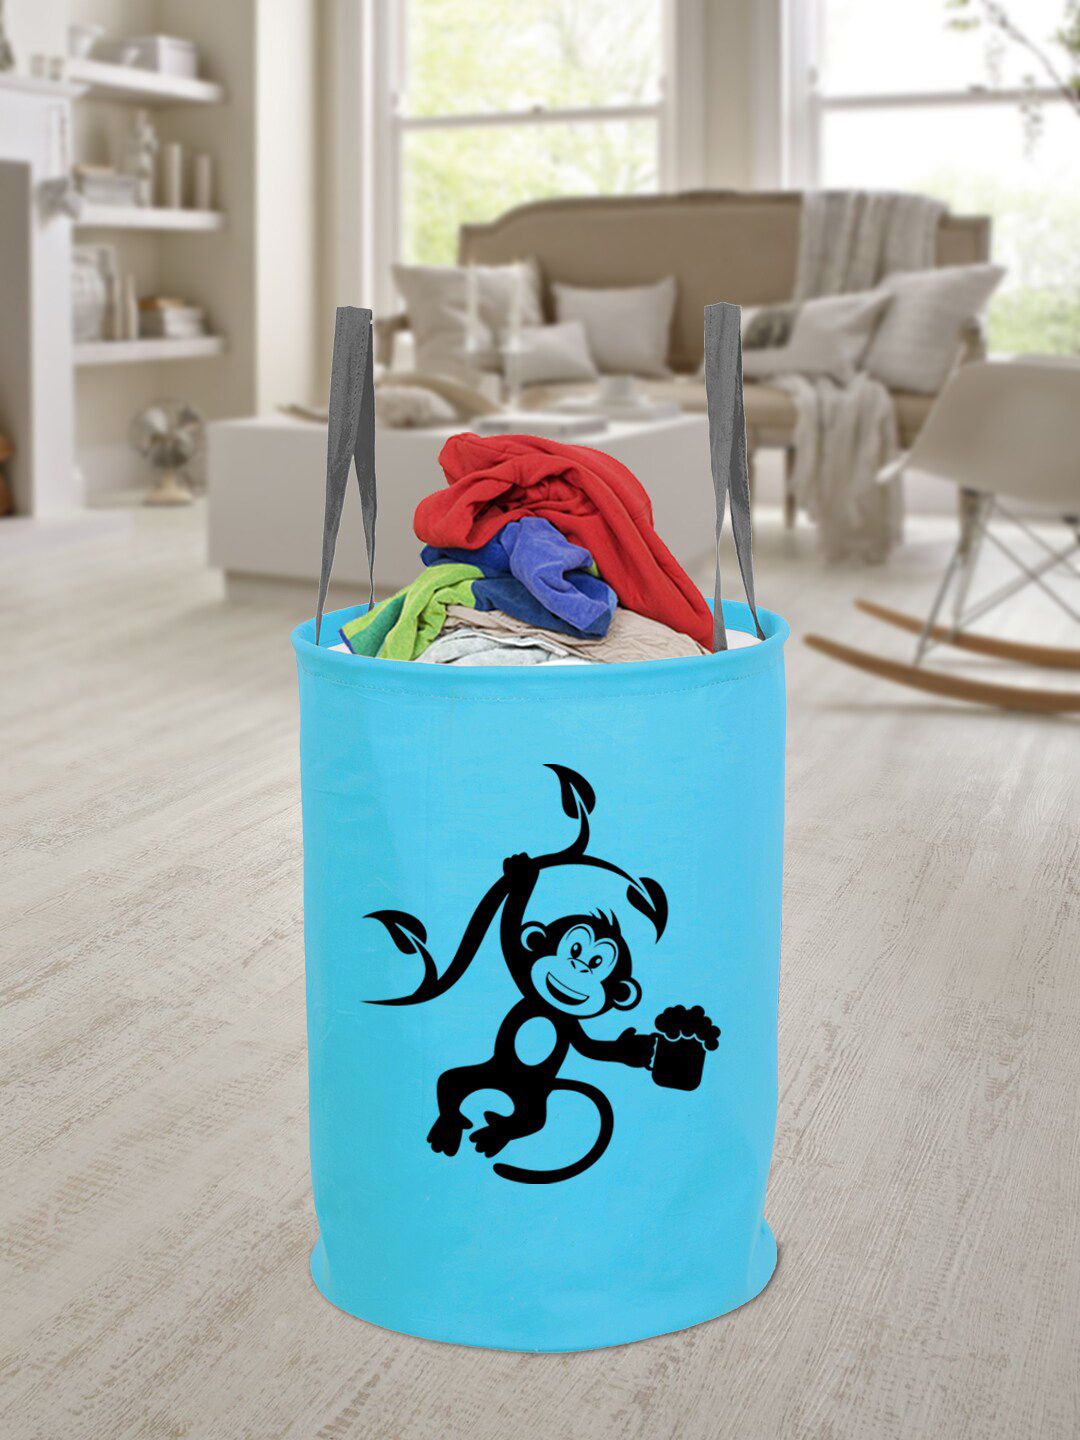 prettykrafts Blue & Black Printed Multiutility Laundry Baskets Price in India